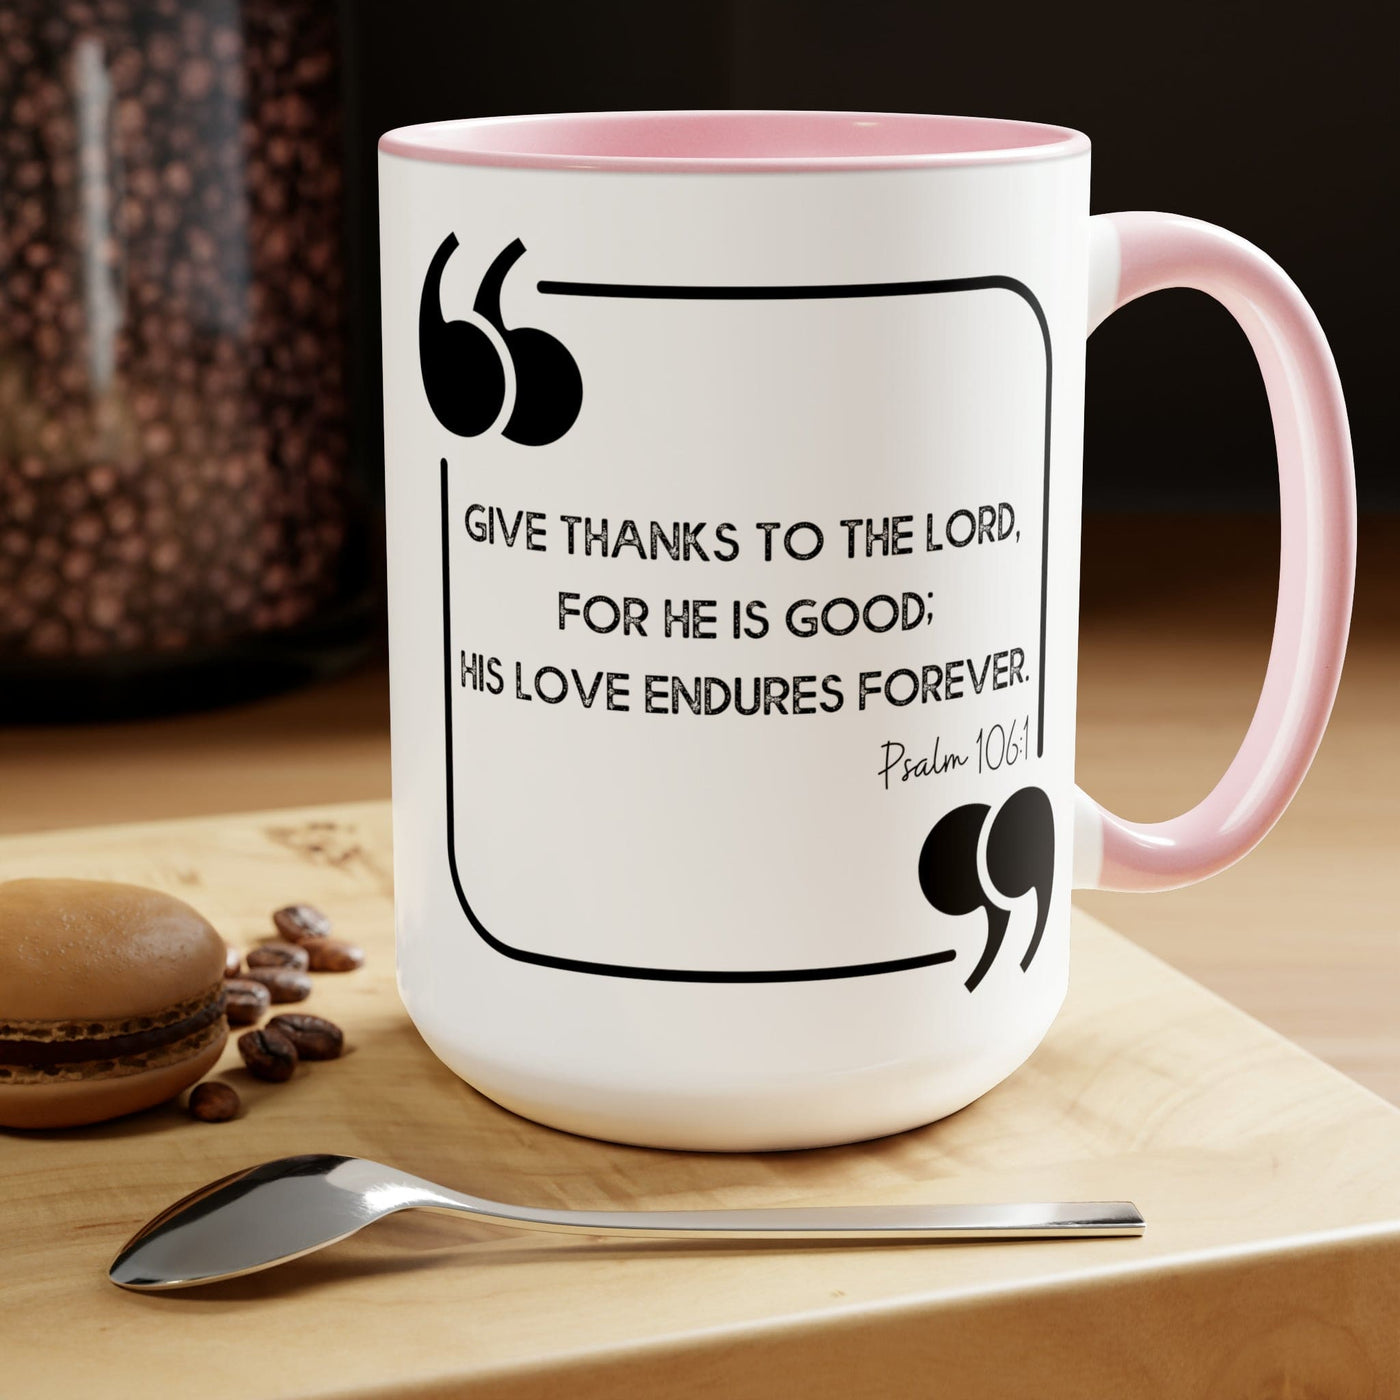 Accent Ceramic Coffee Mug 15oz - Give Thanks To The Lord Black Illustration -